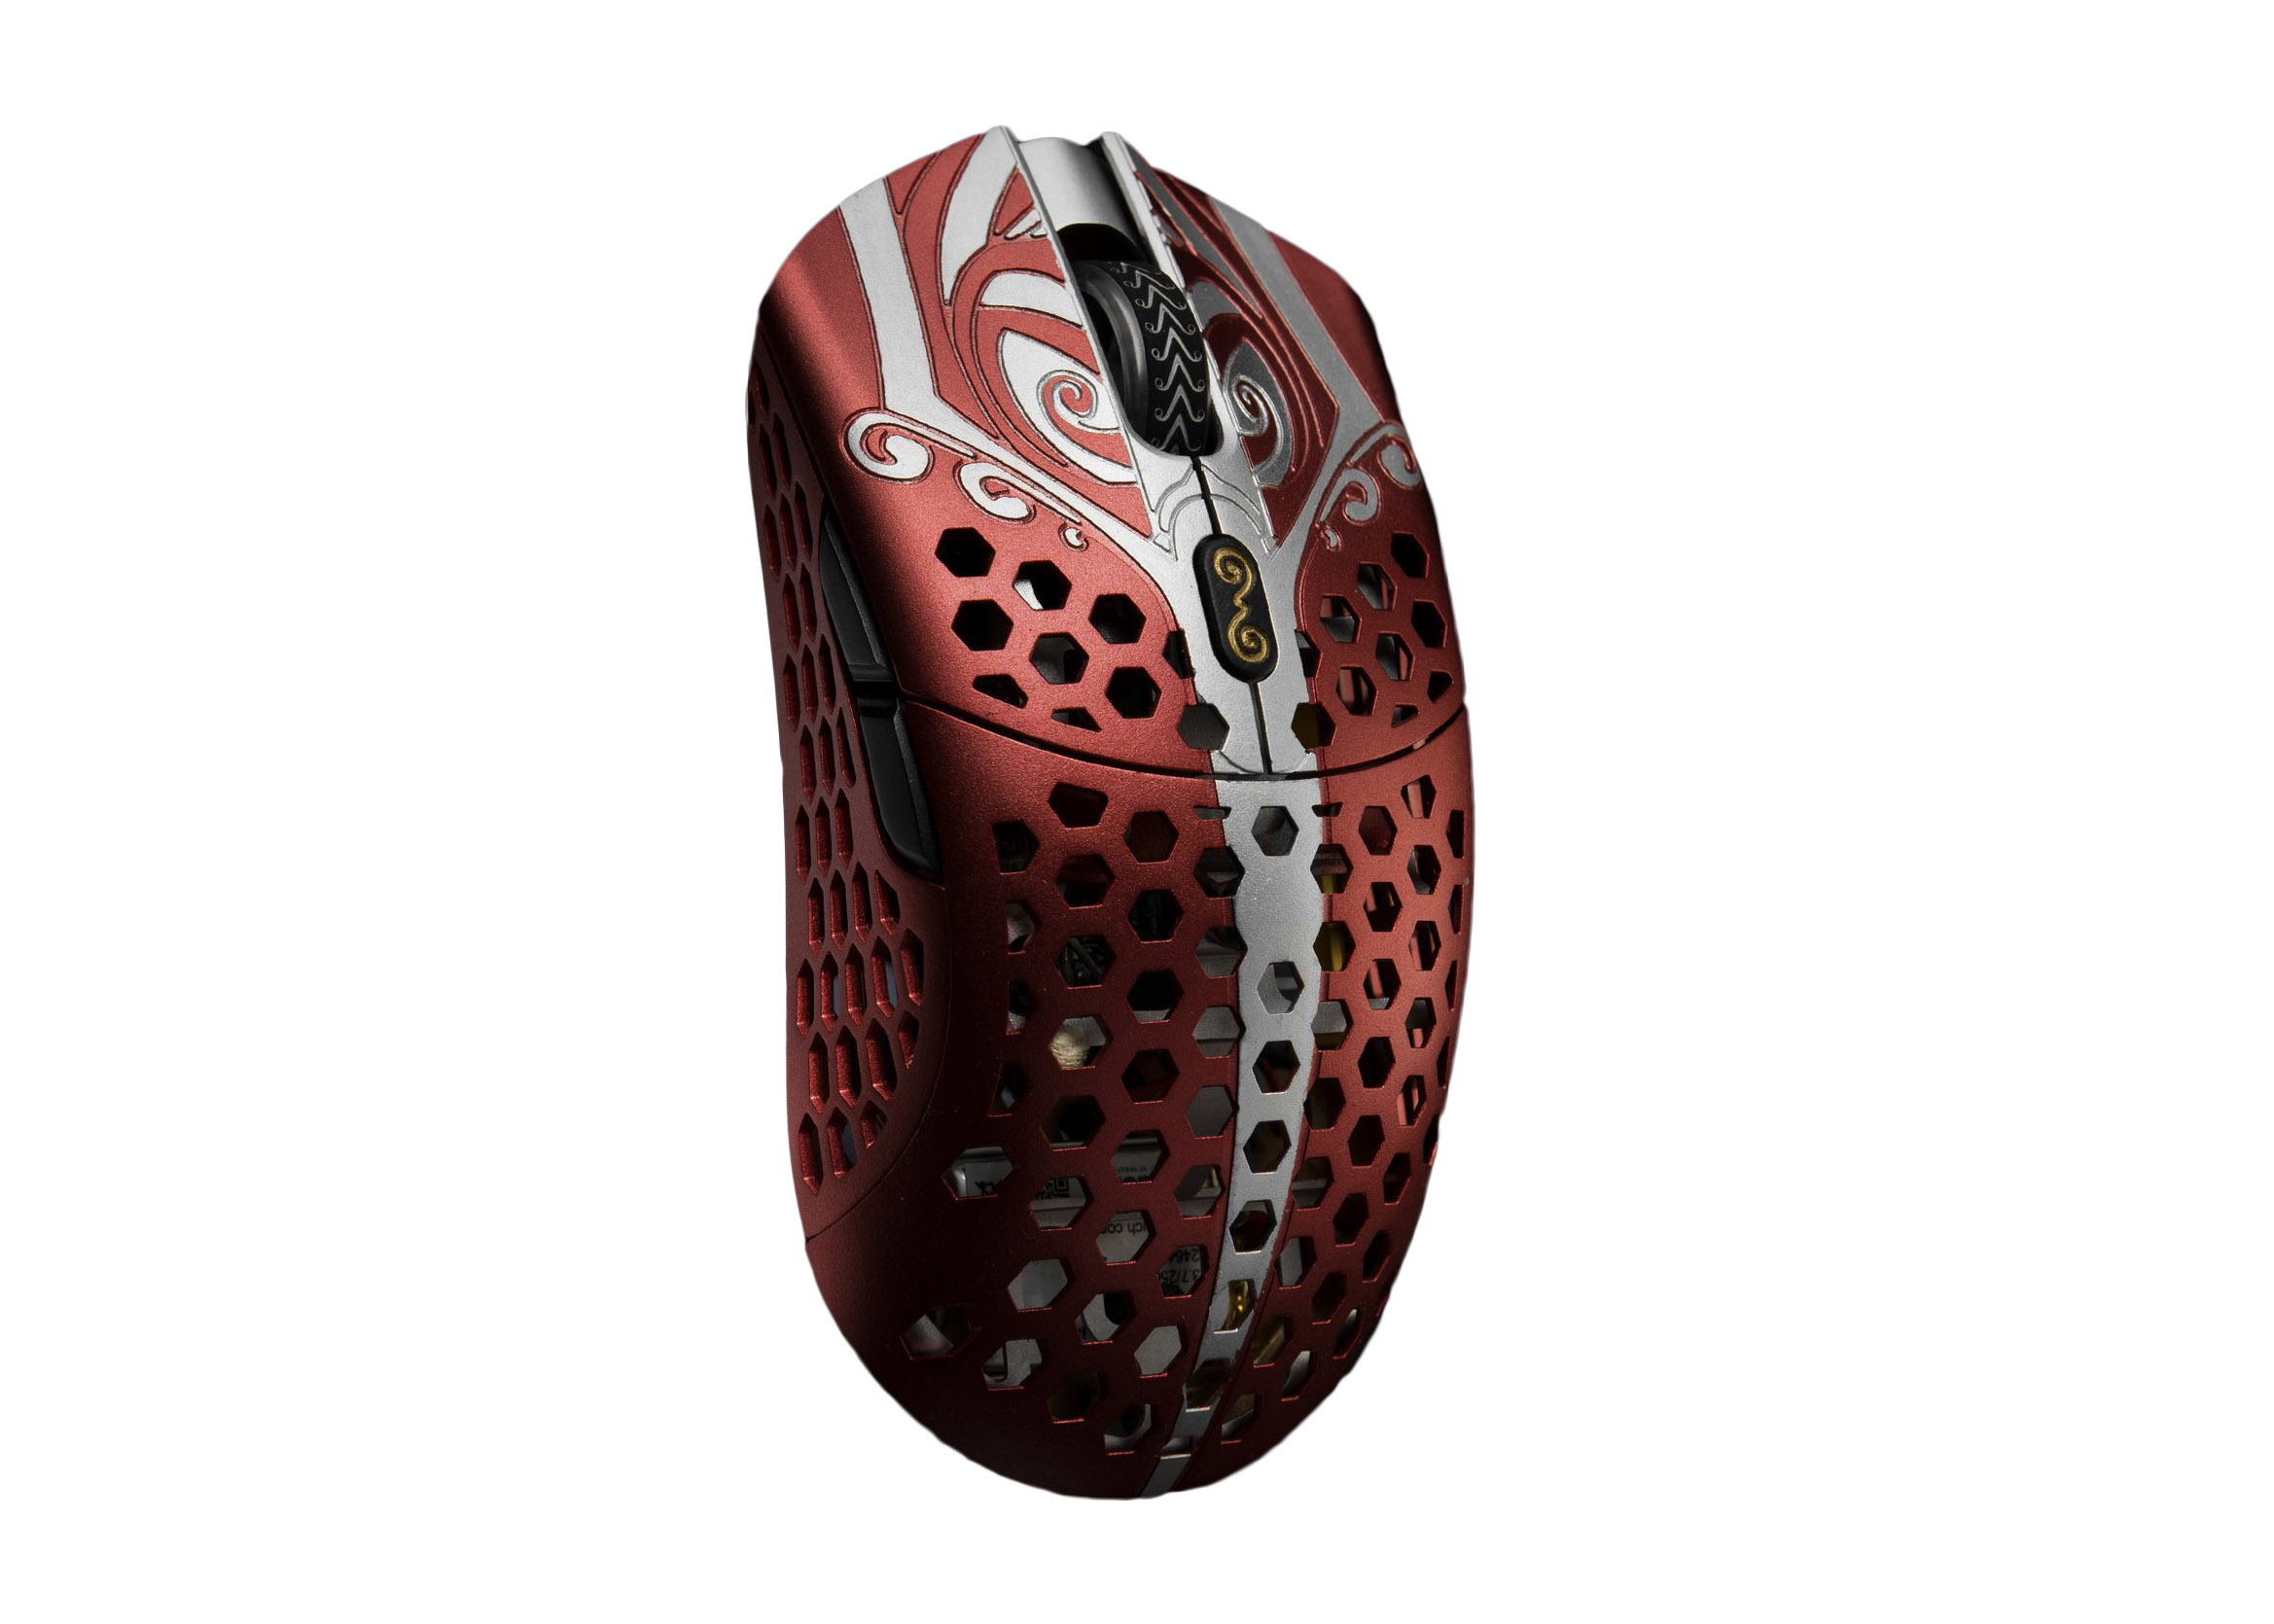 Finalmouse Starlight-12 Wireless Mouse Medium Ares God of War